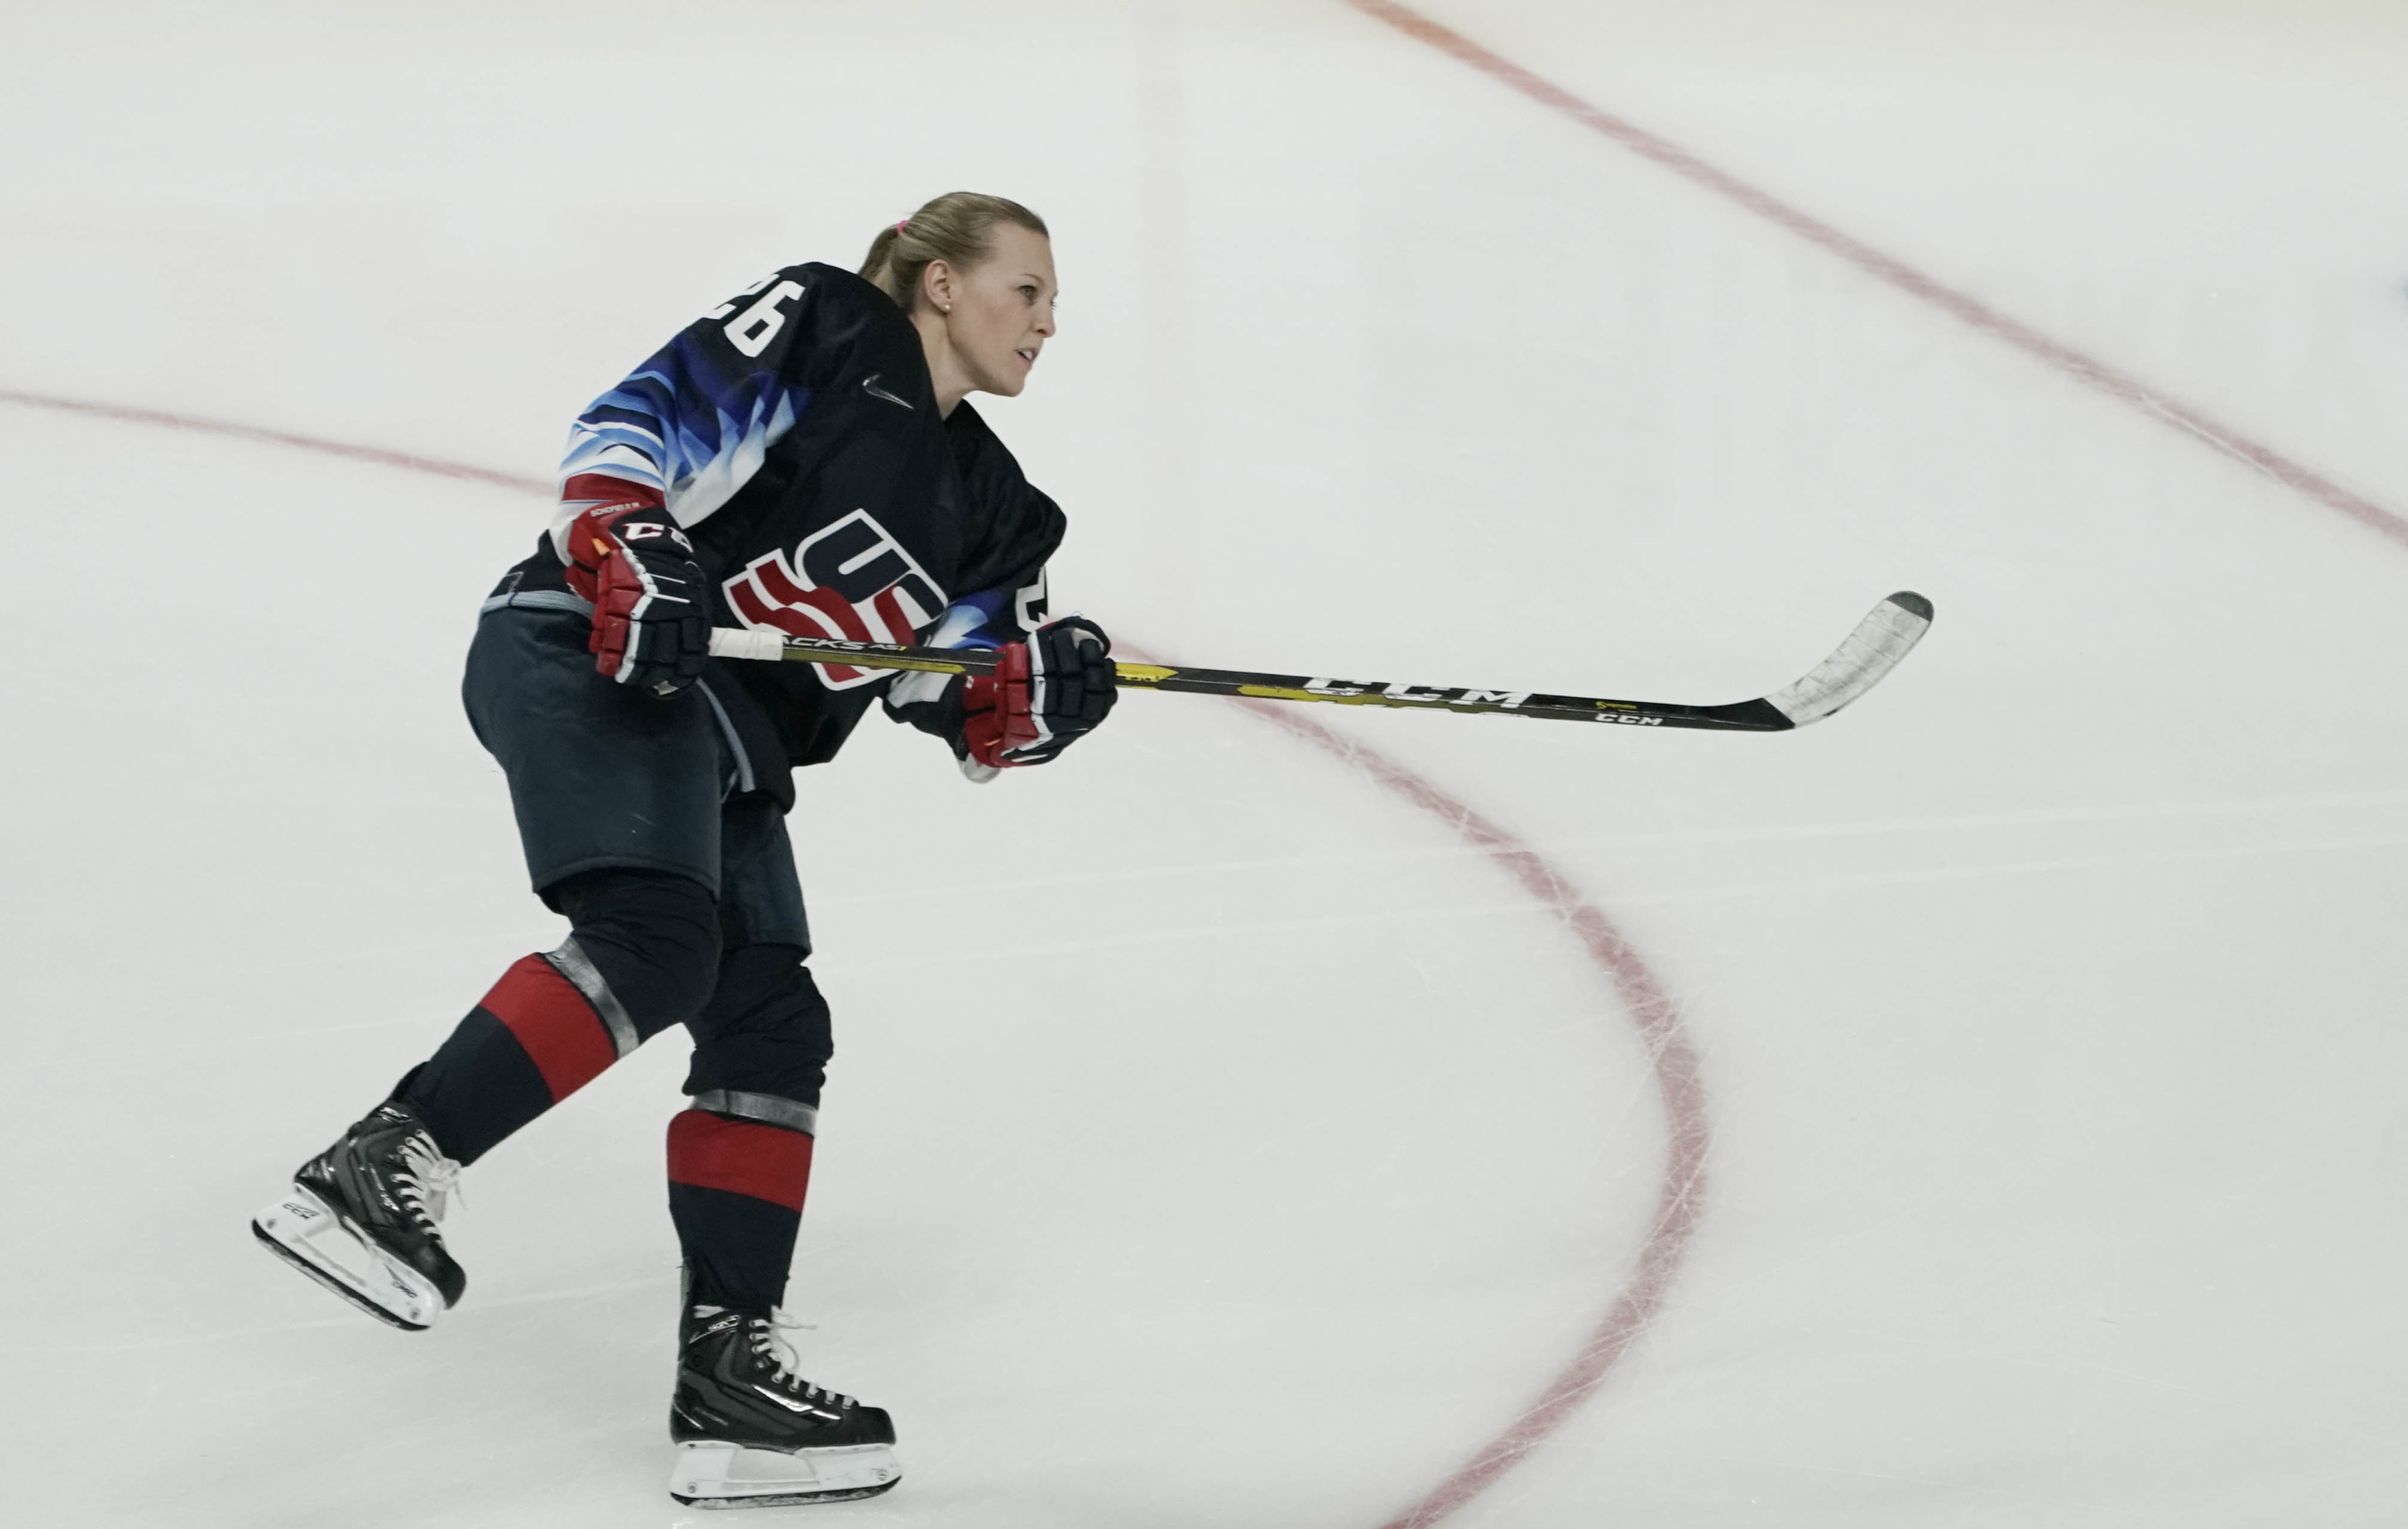 Women's Hockey Receives Largest Commitment Ever from Secret